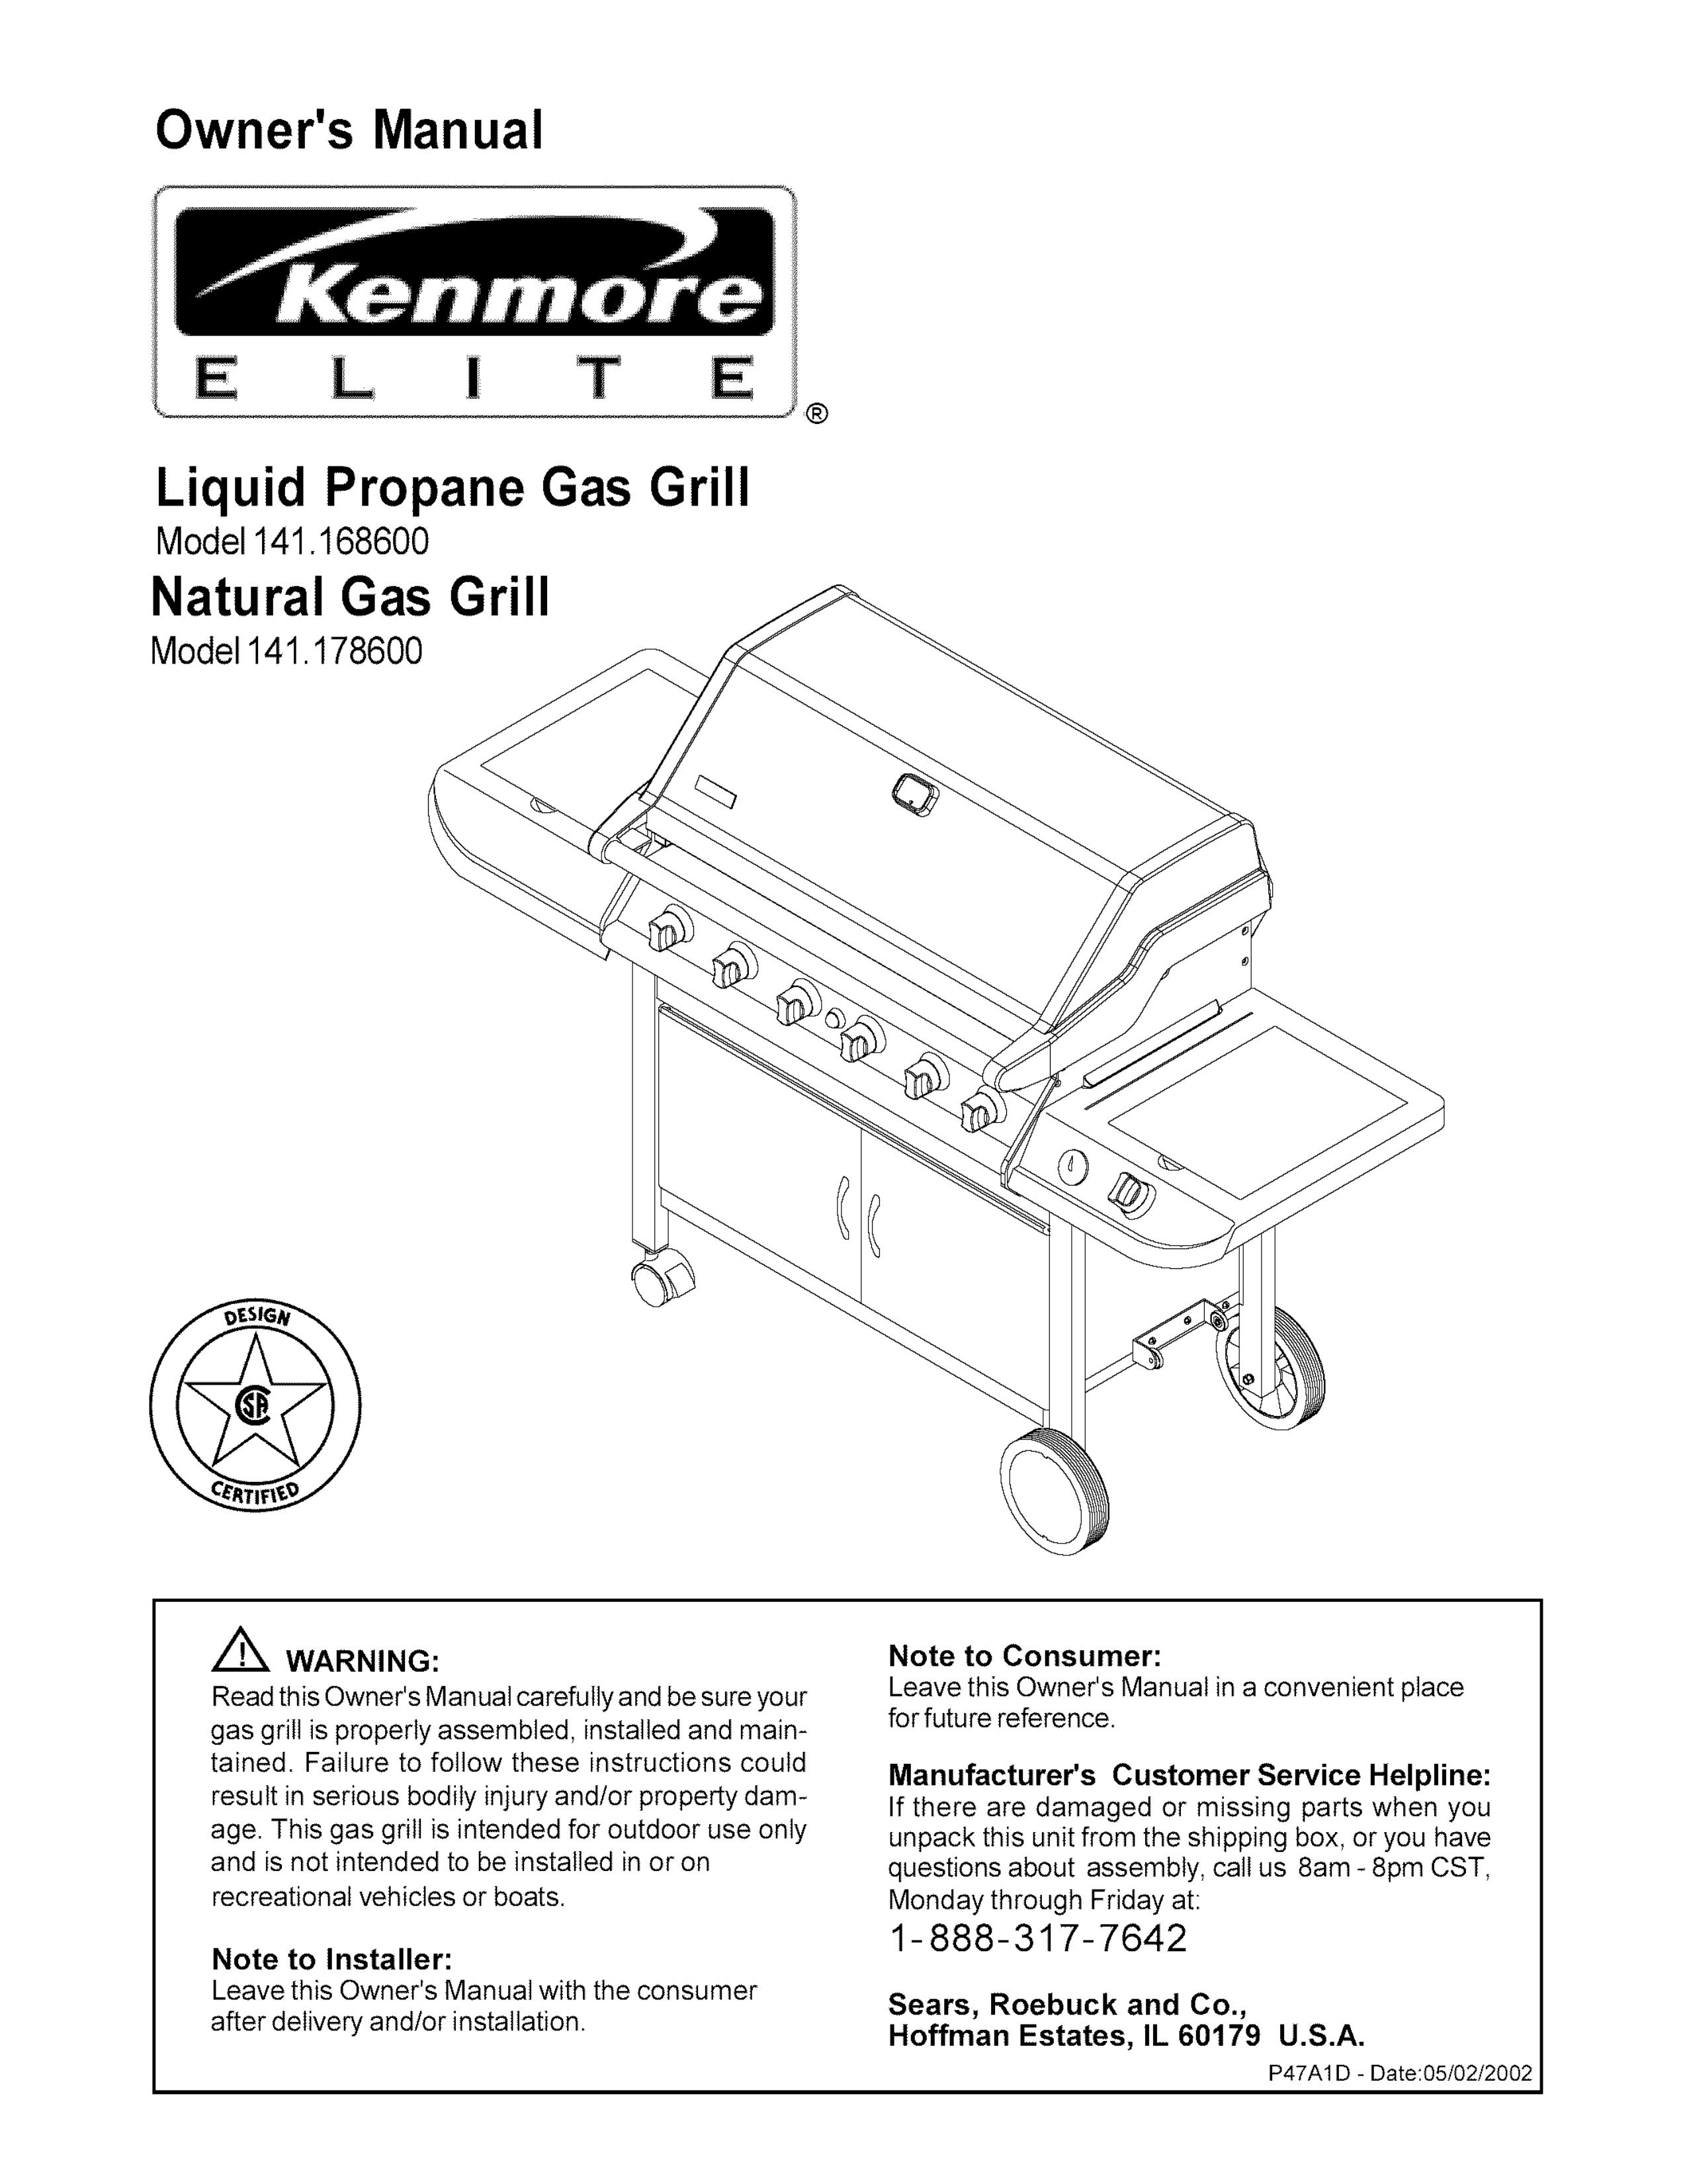 Kenmore 141.1786 Gas Grill User Manual